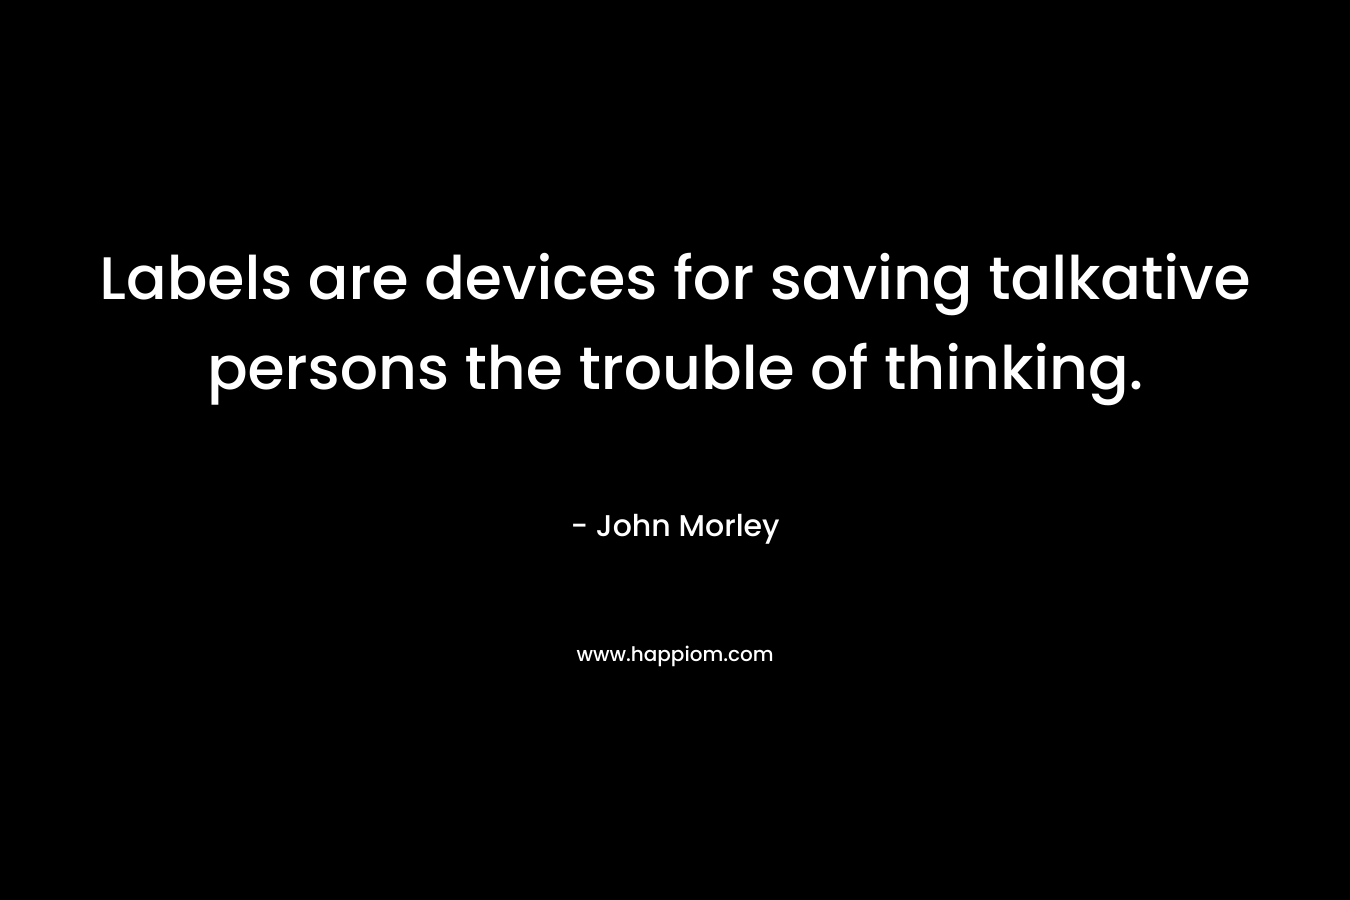 Labels are devices for saving talkative persons the trouble of thinking. – John Morley